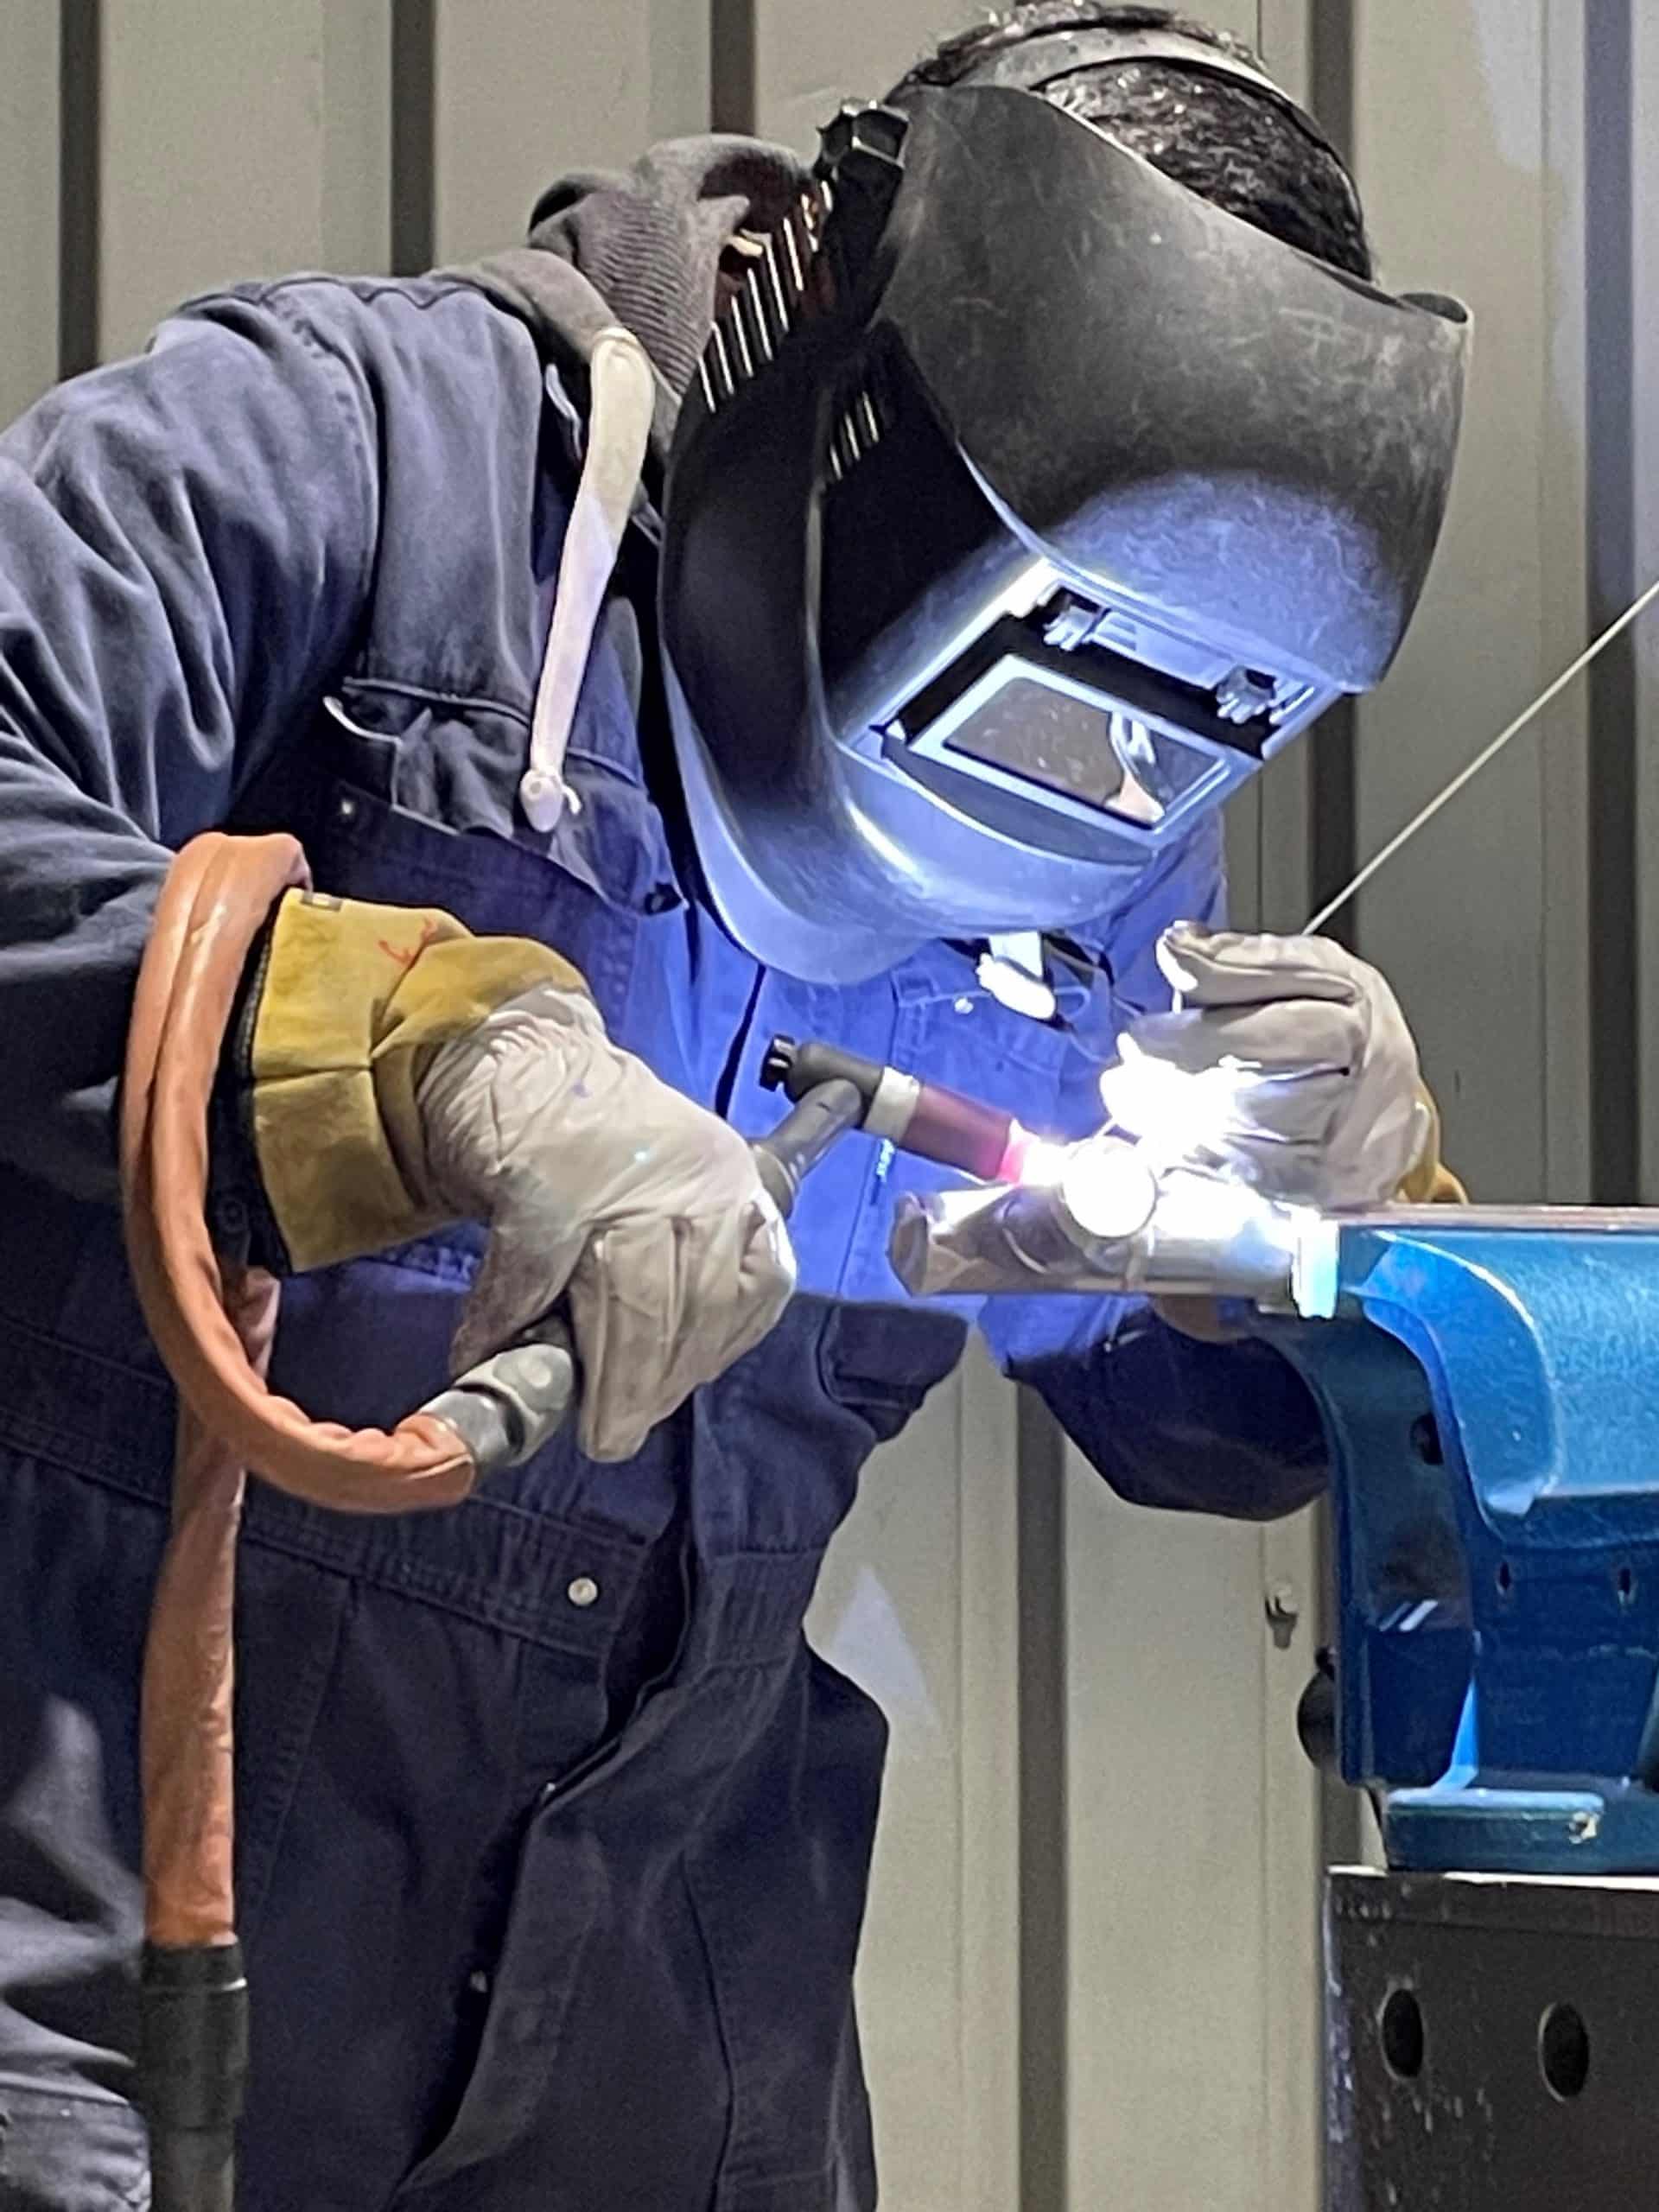 Welder in protective equipment carries out welding work with a bright arc.